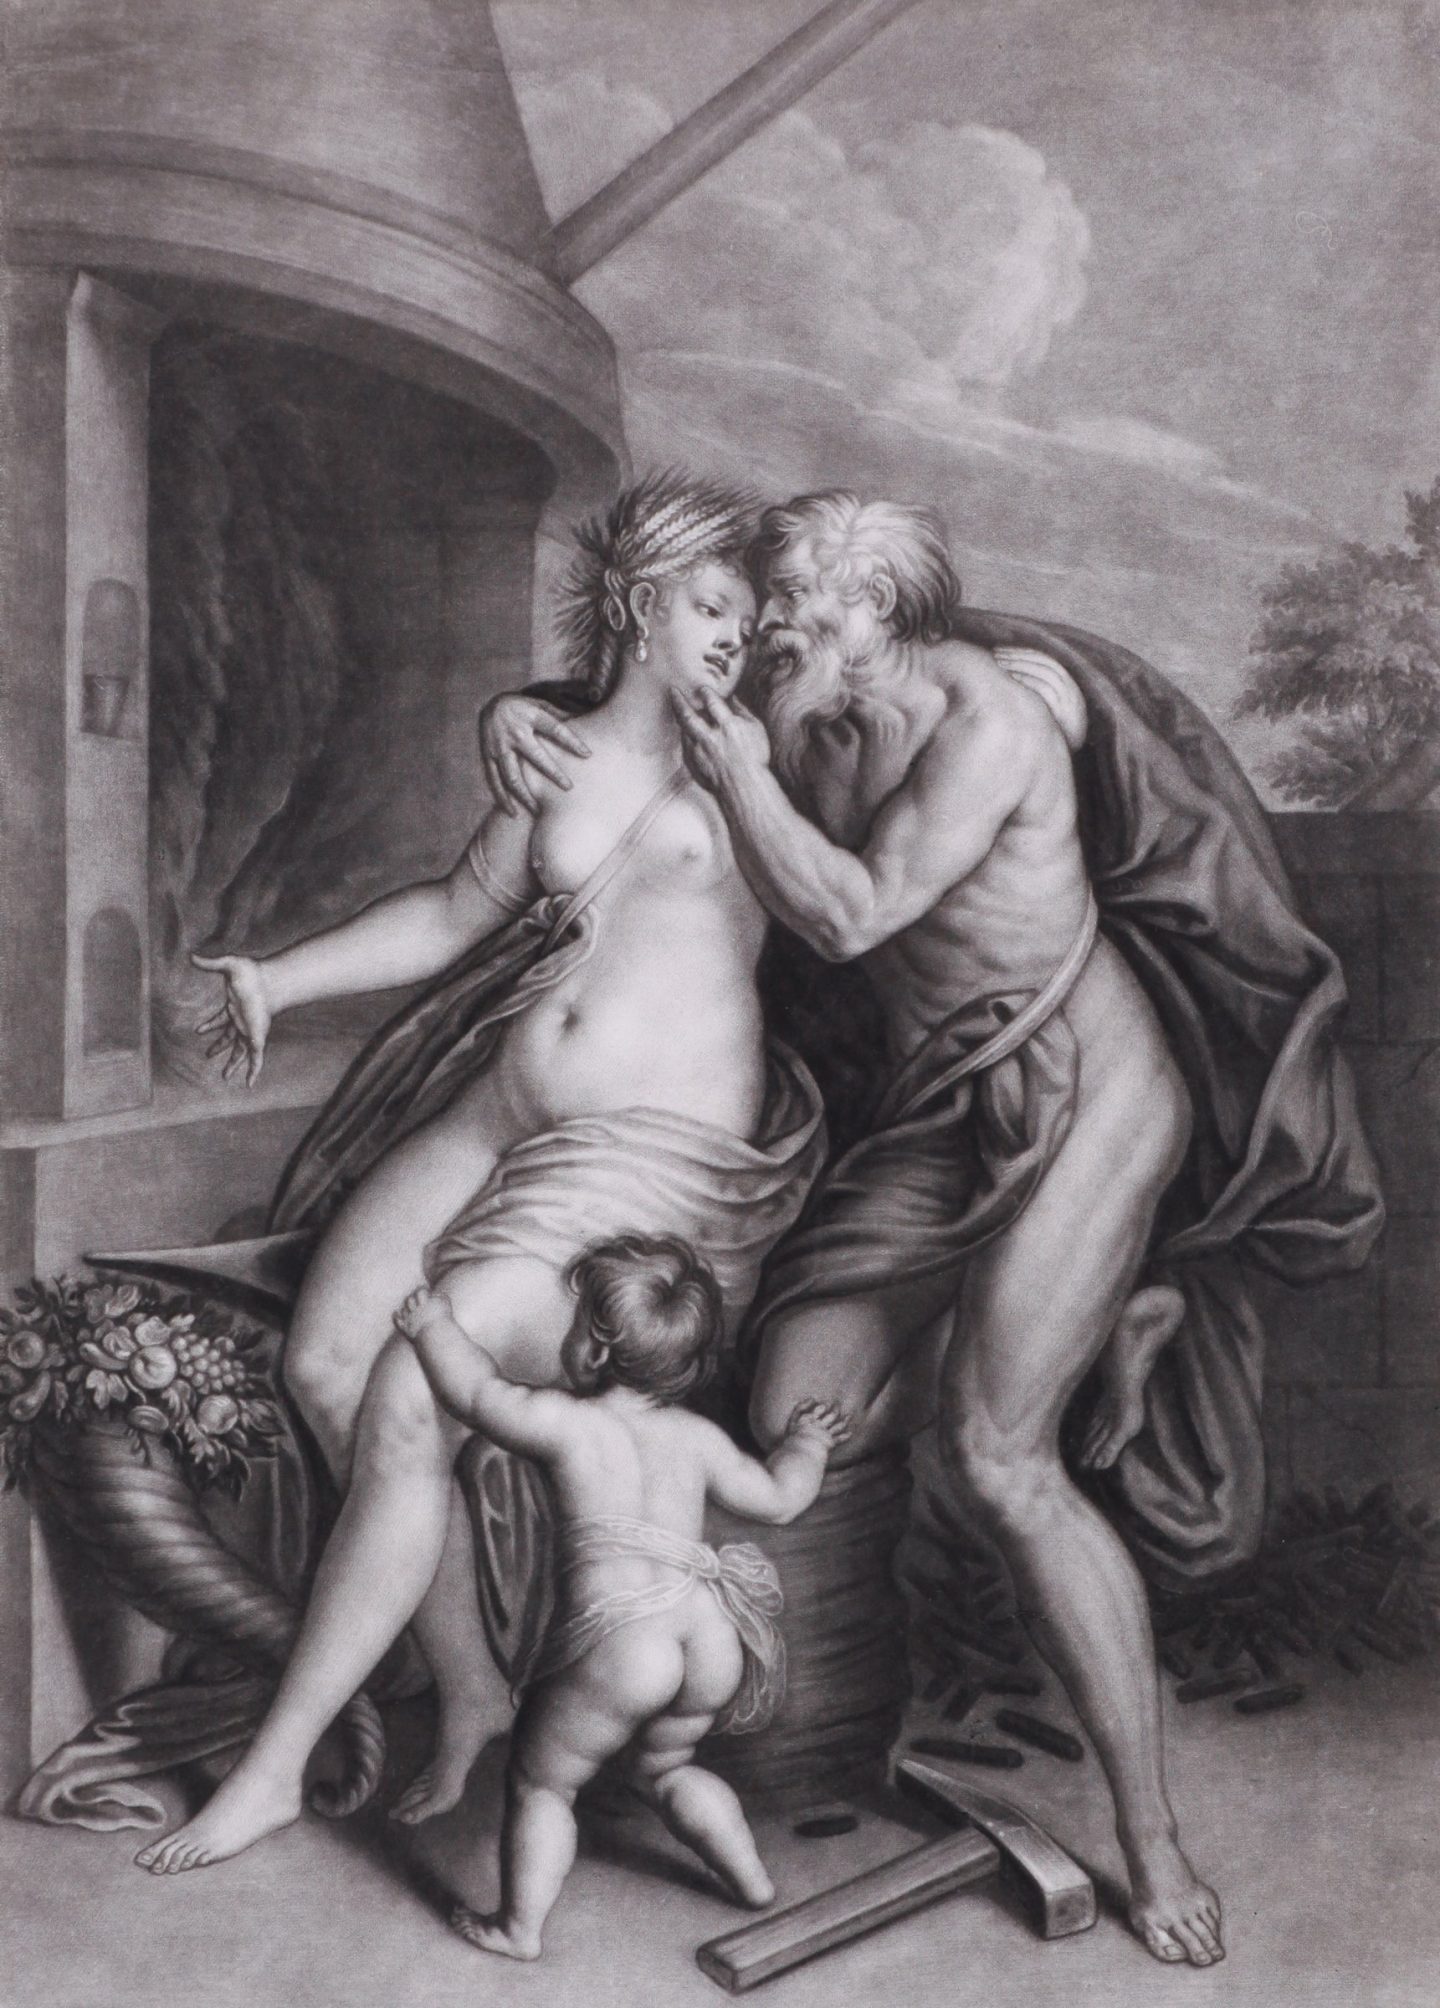 John Smith (after Jacopo Coraglio and Perino del Vaga), Vulcan et Ceres, 1708, mezzotint and engraving. Bequest of Ethel A. Waldron estate, 1968 (11-007)